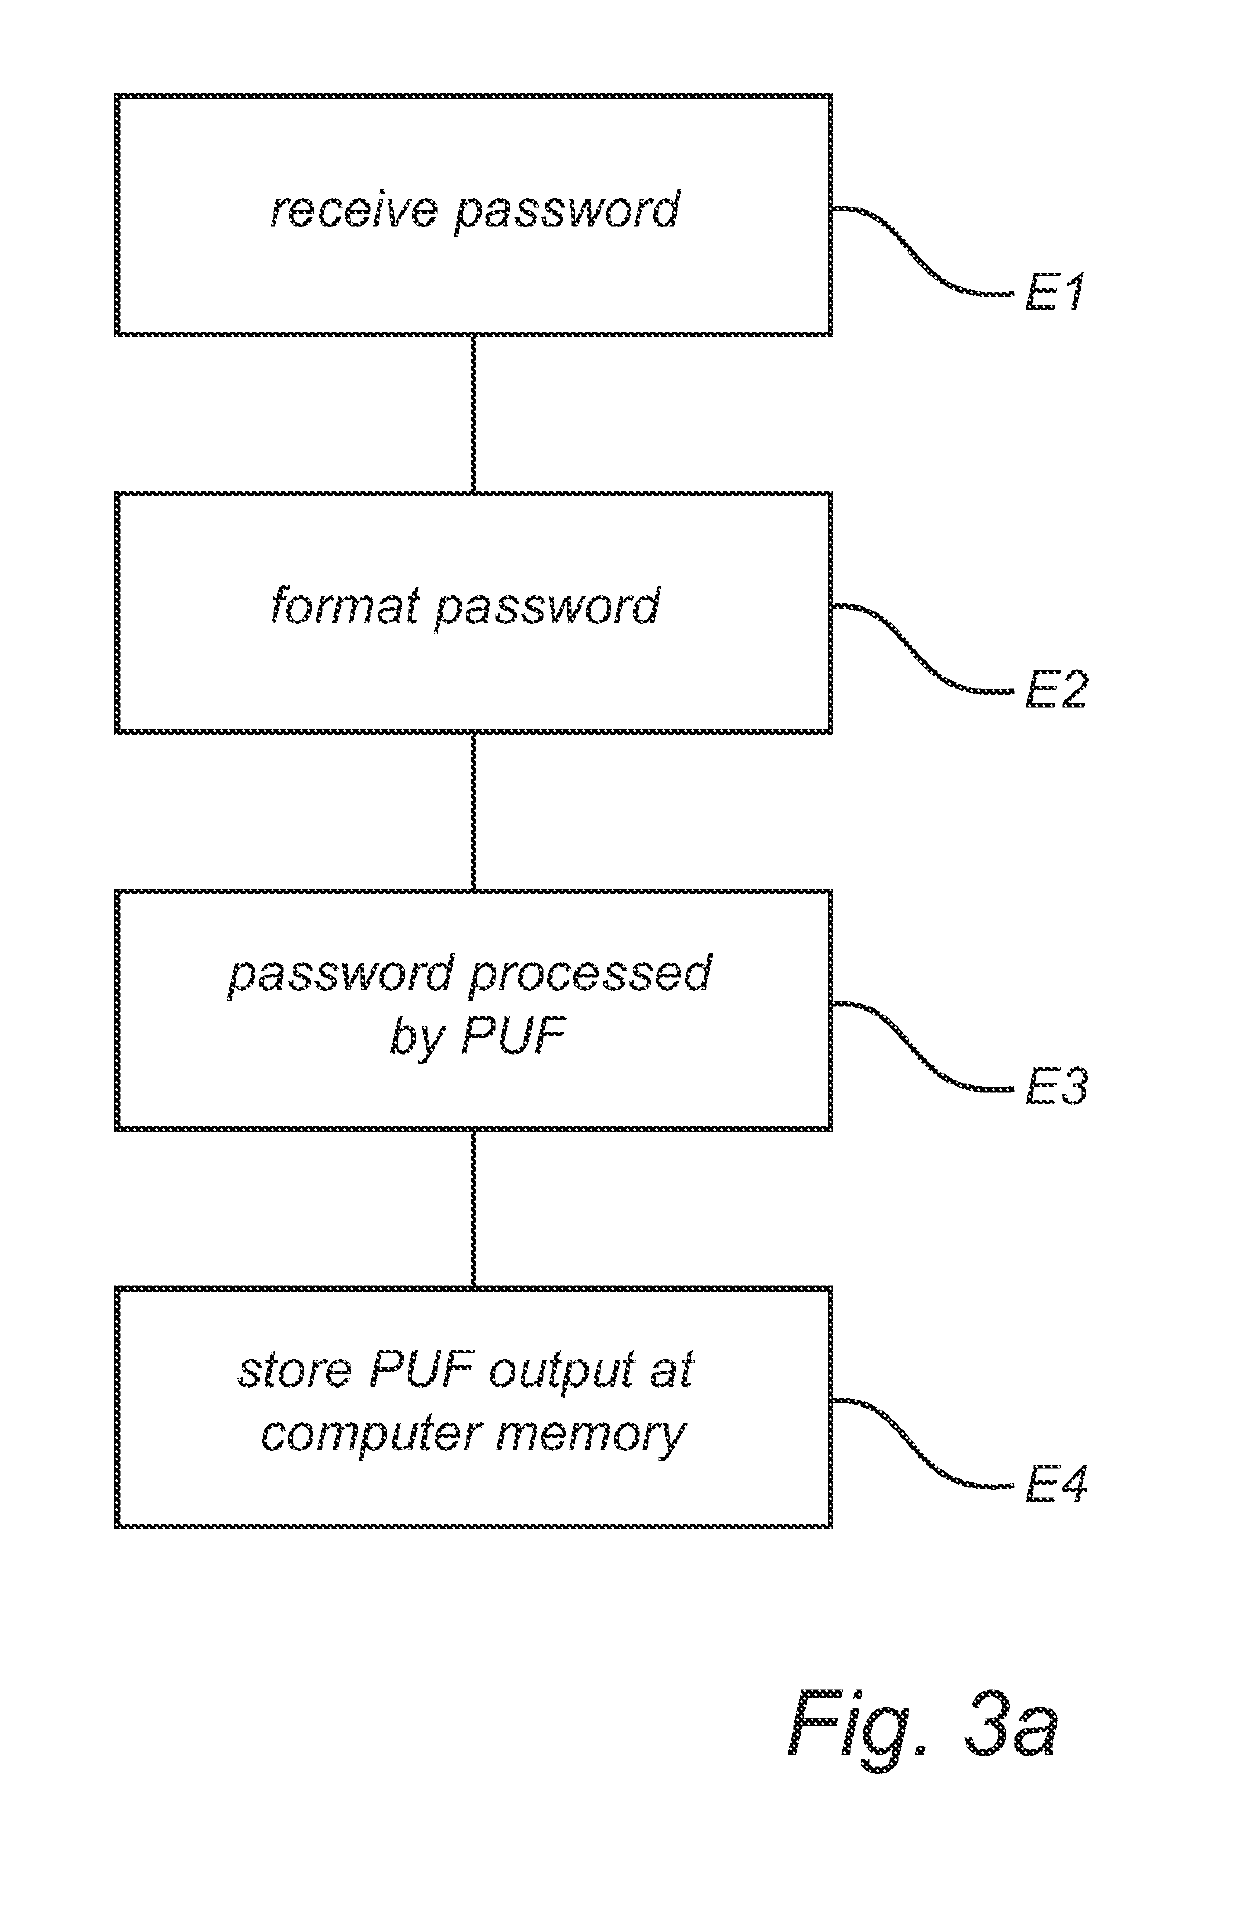 Method and system for secure password storage